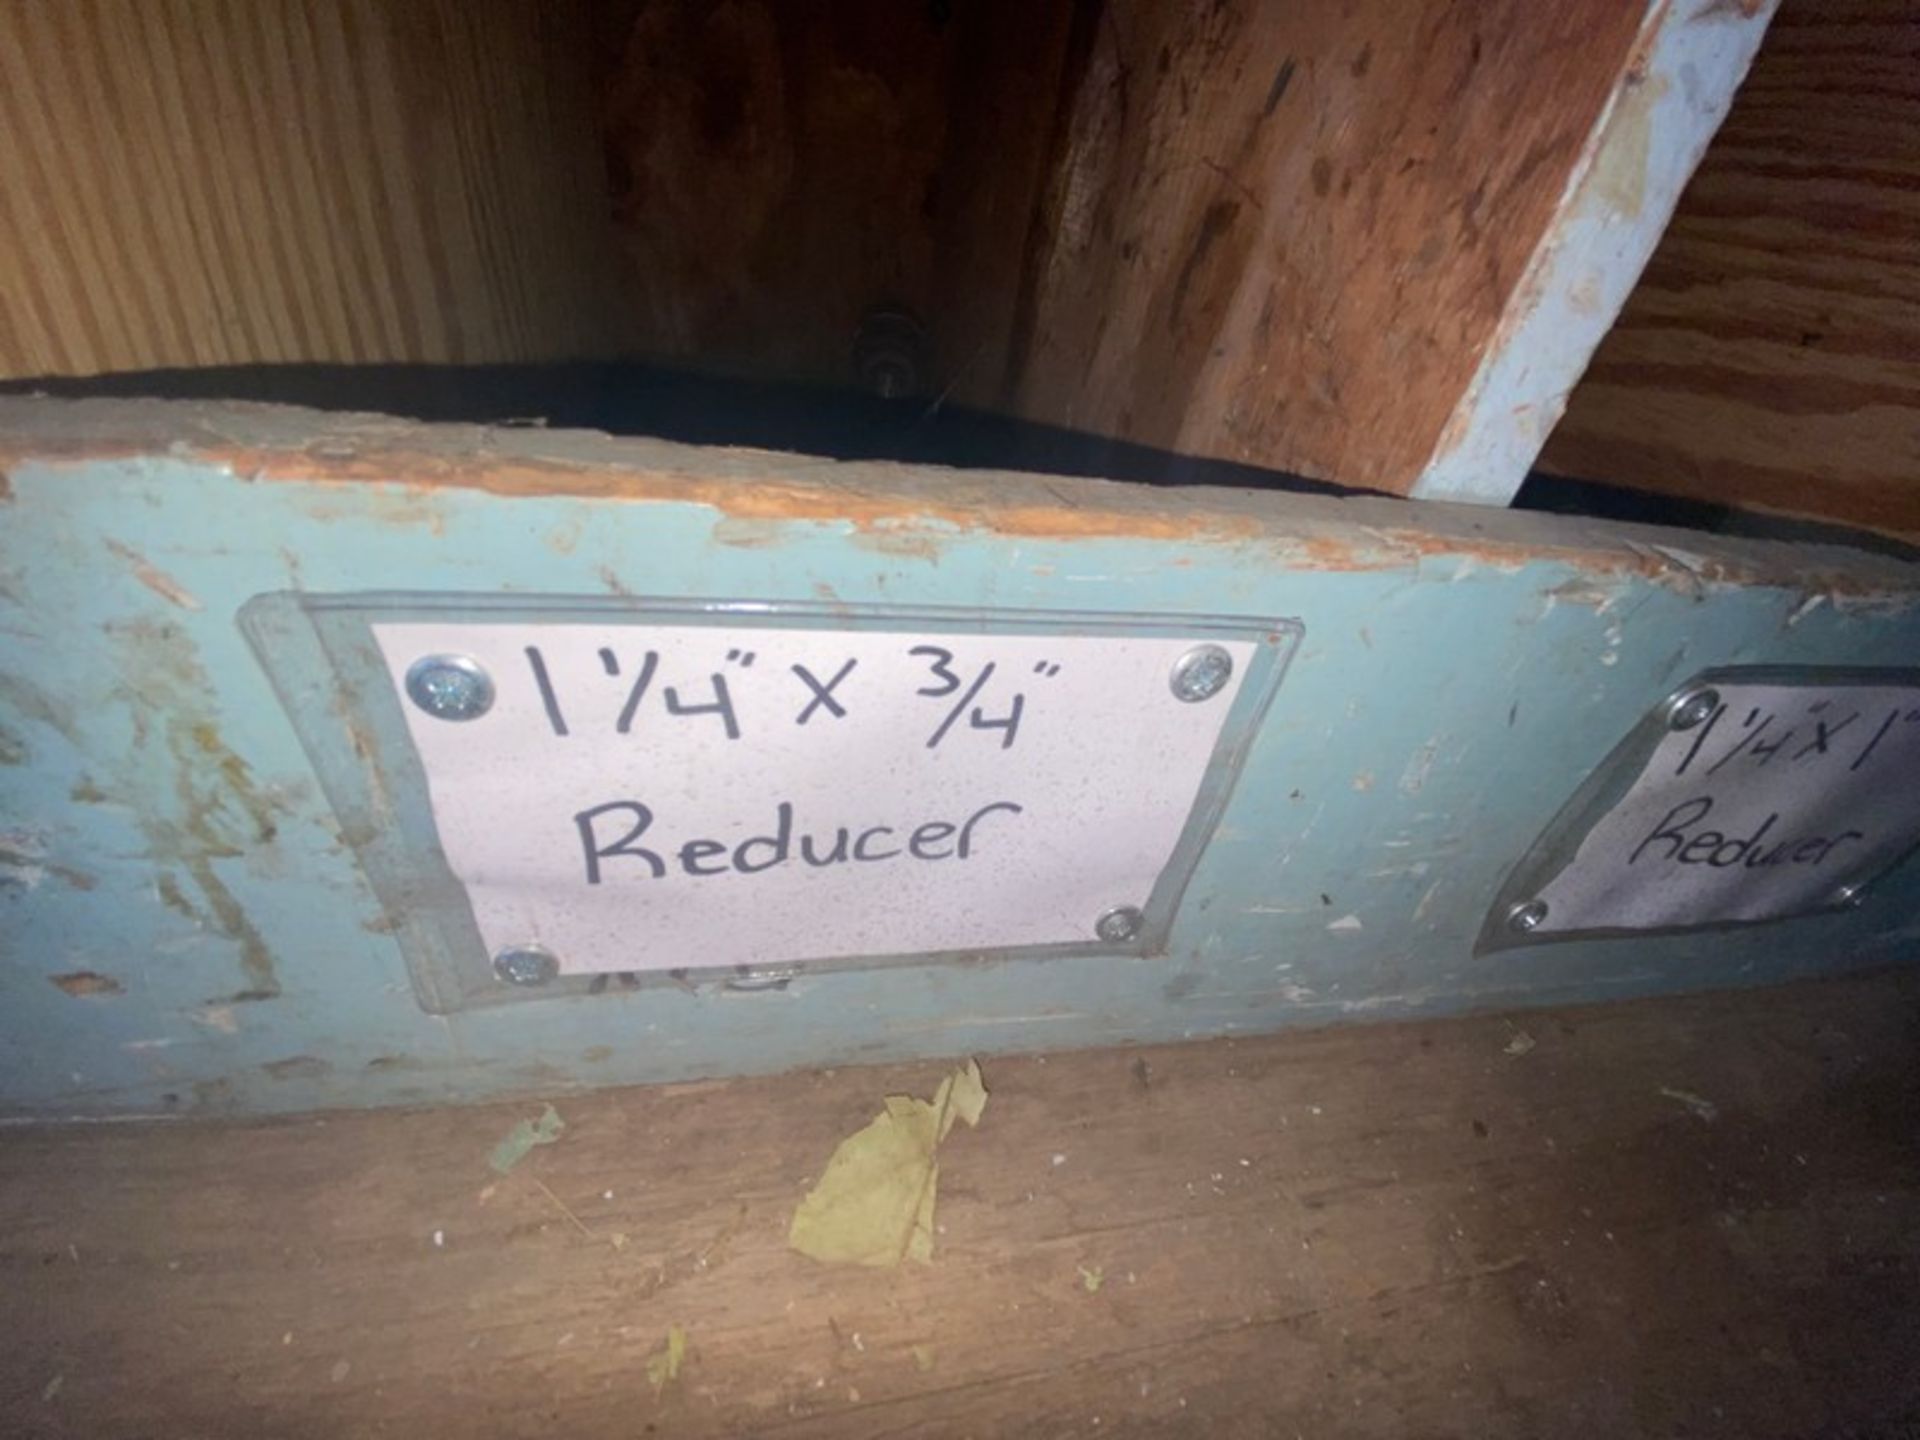 1 1/4”x 1/2” Reducer; 1 1/4”x 3/4” Reducer; 1 1/4”x 1” Reducer; 1 1/2”x 3/4” Reducer; 4”x3” Reducer; - Image 19 of 19